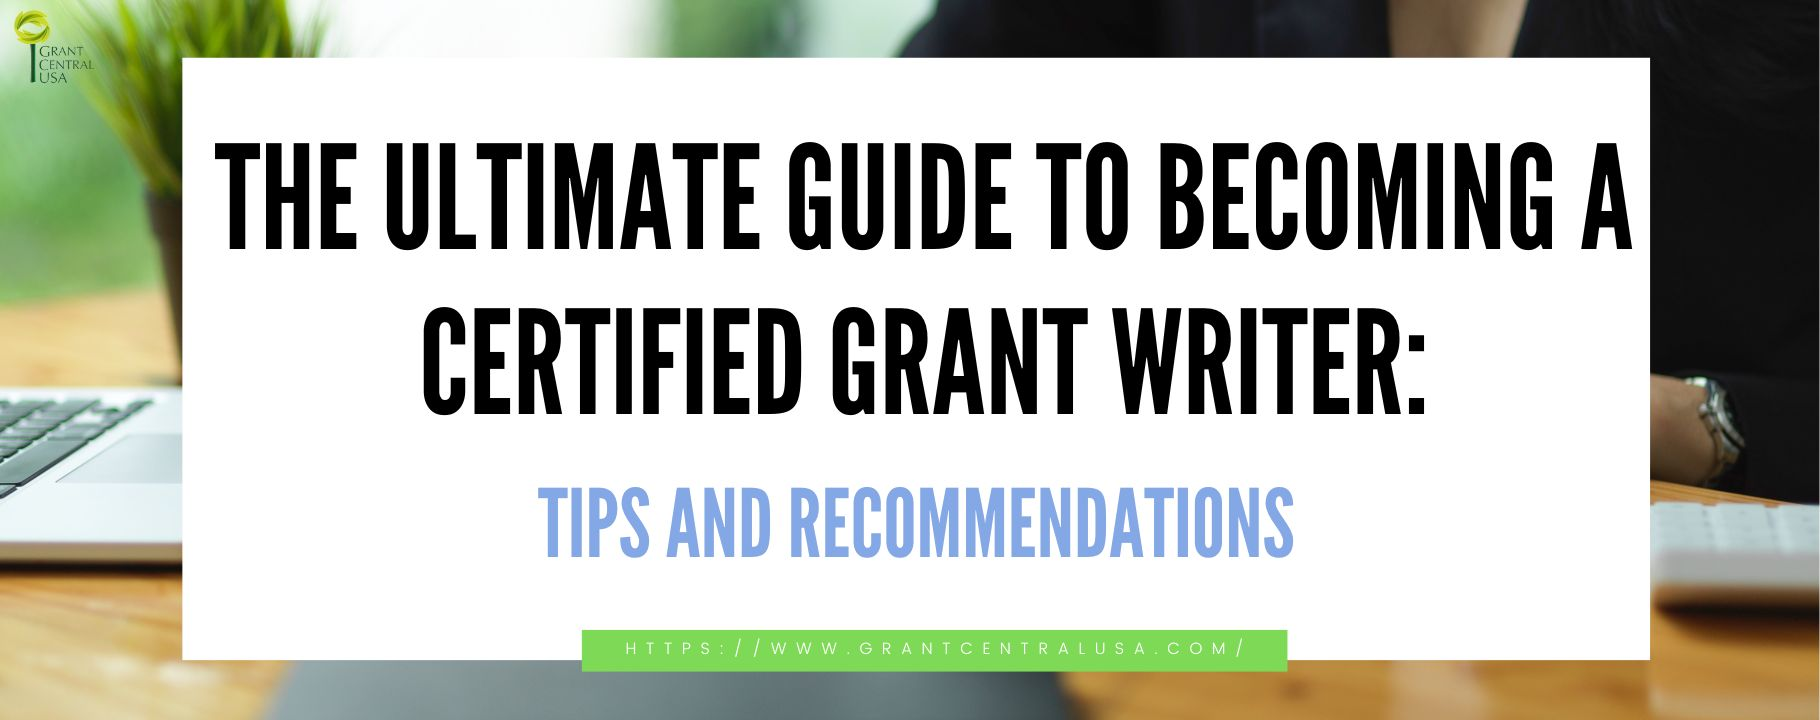 Grant Writer Tips and Recommendations on how to be a Certified Grant Writer 